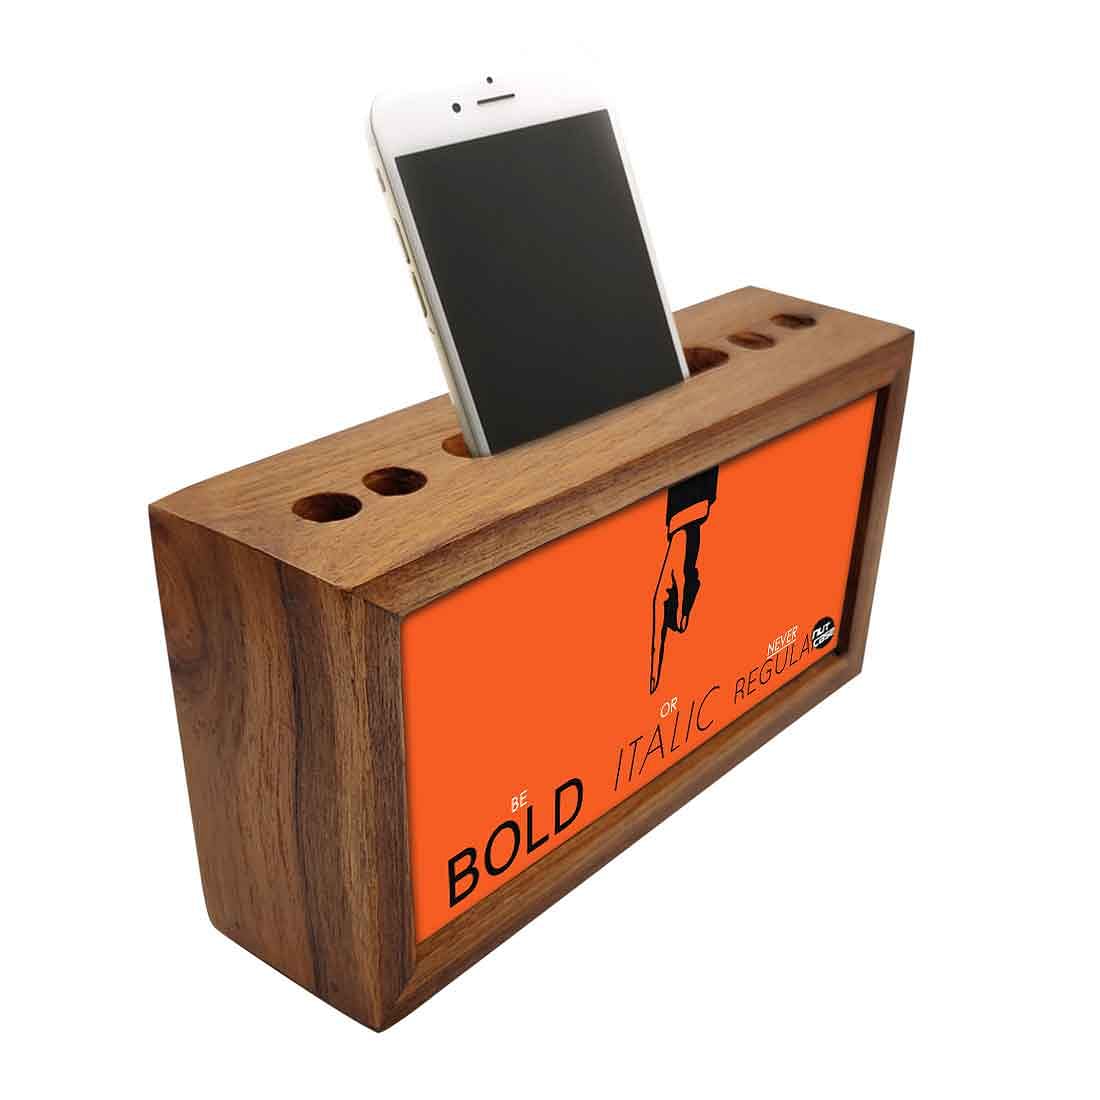 Pen Stand Mobile Holder for Office or Study Table - Be Bold Nutcase